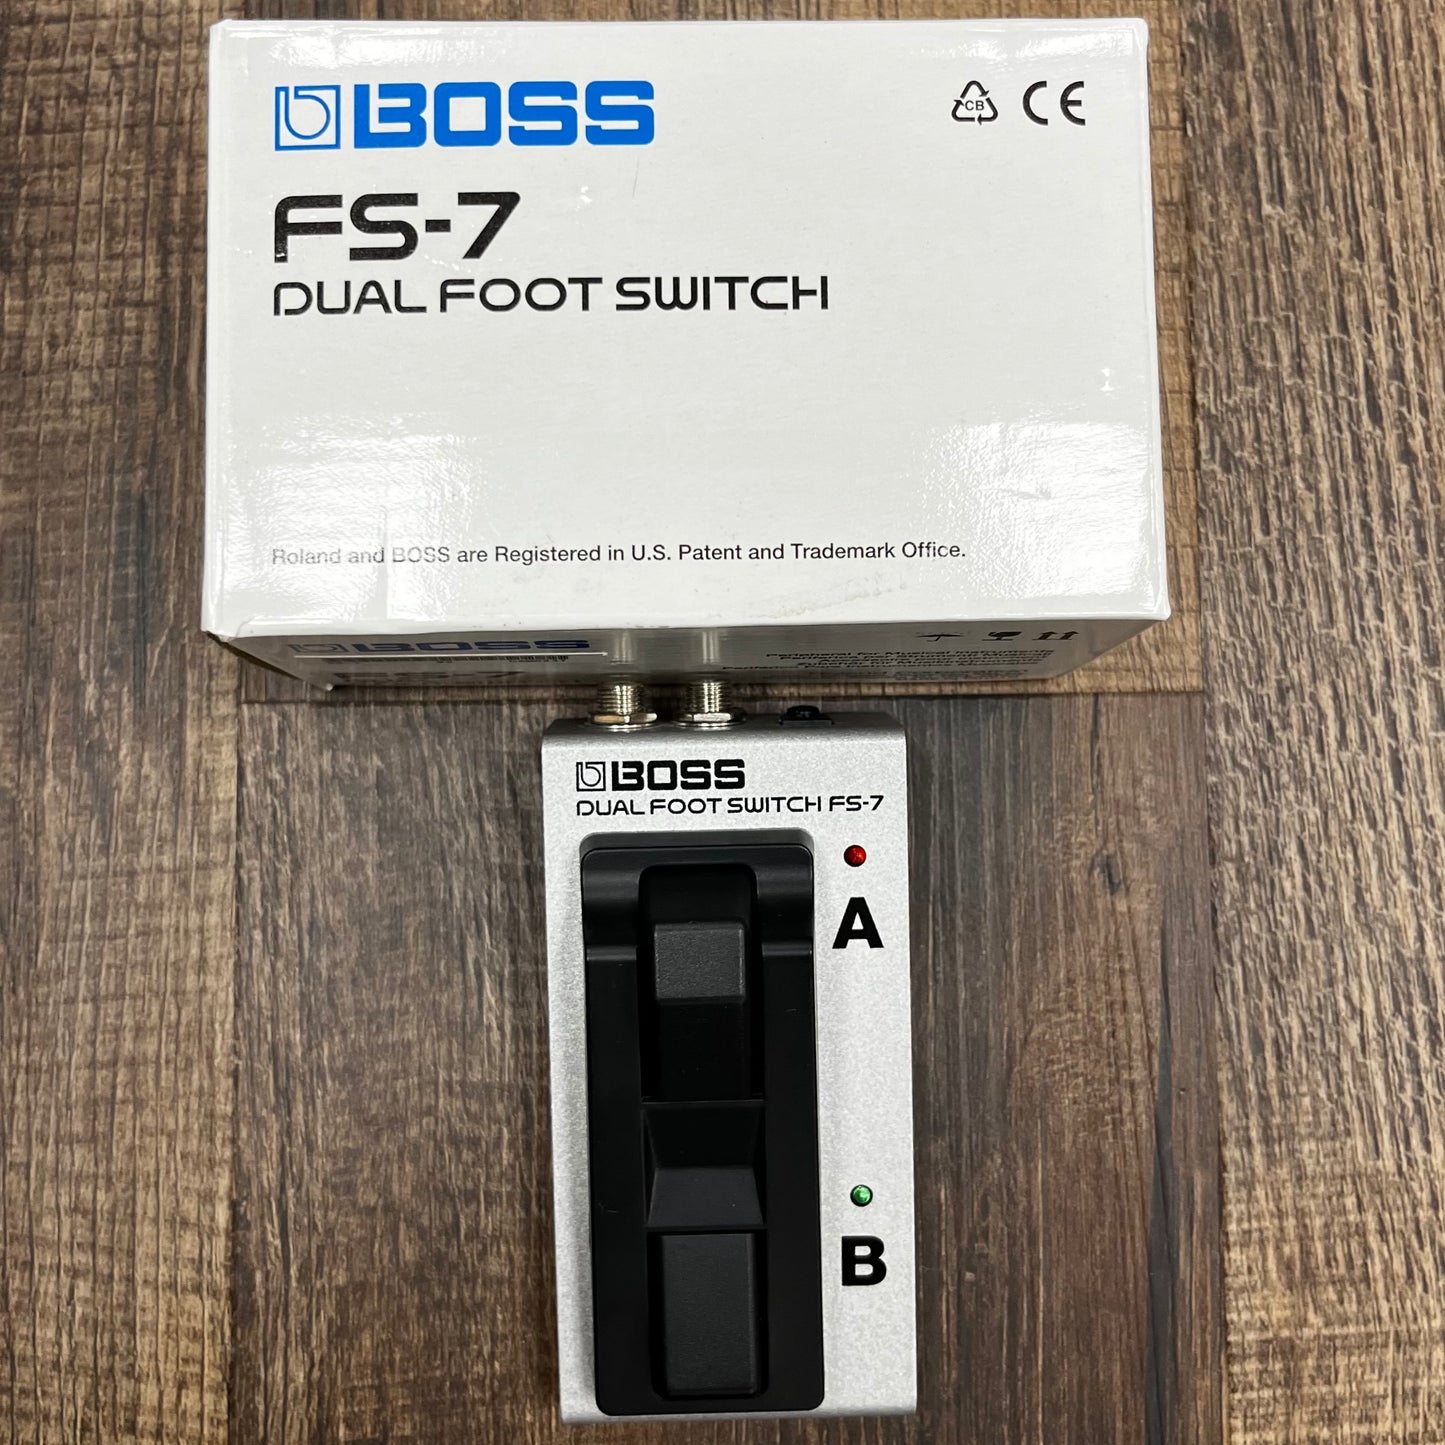 Top of w/box of Used Boss FS-7 Footswitch w/box TFW115